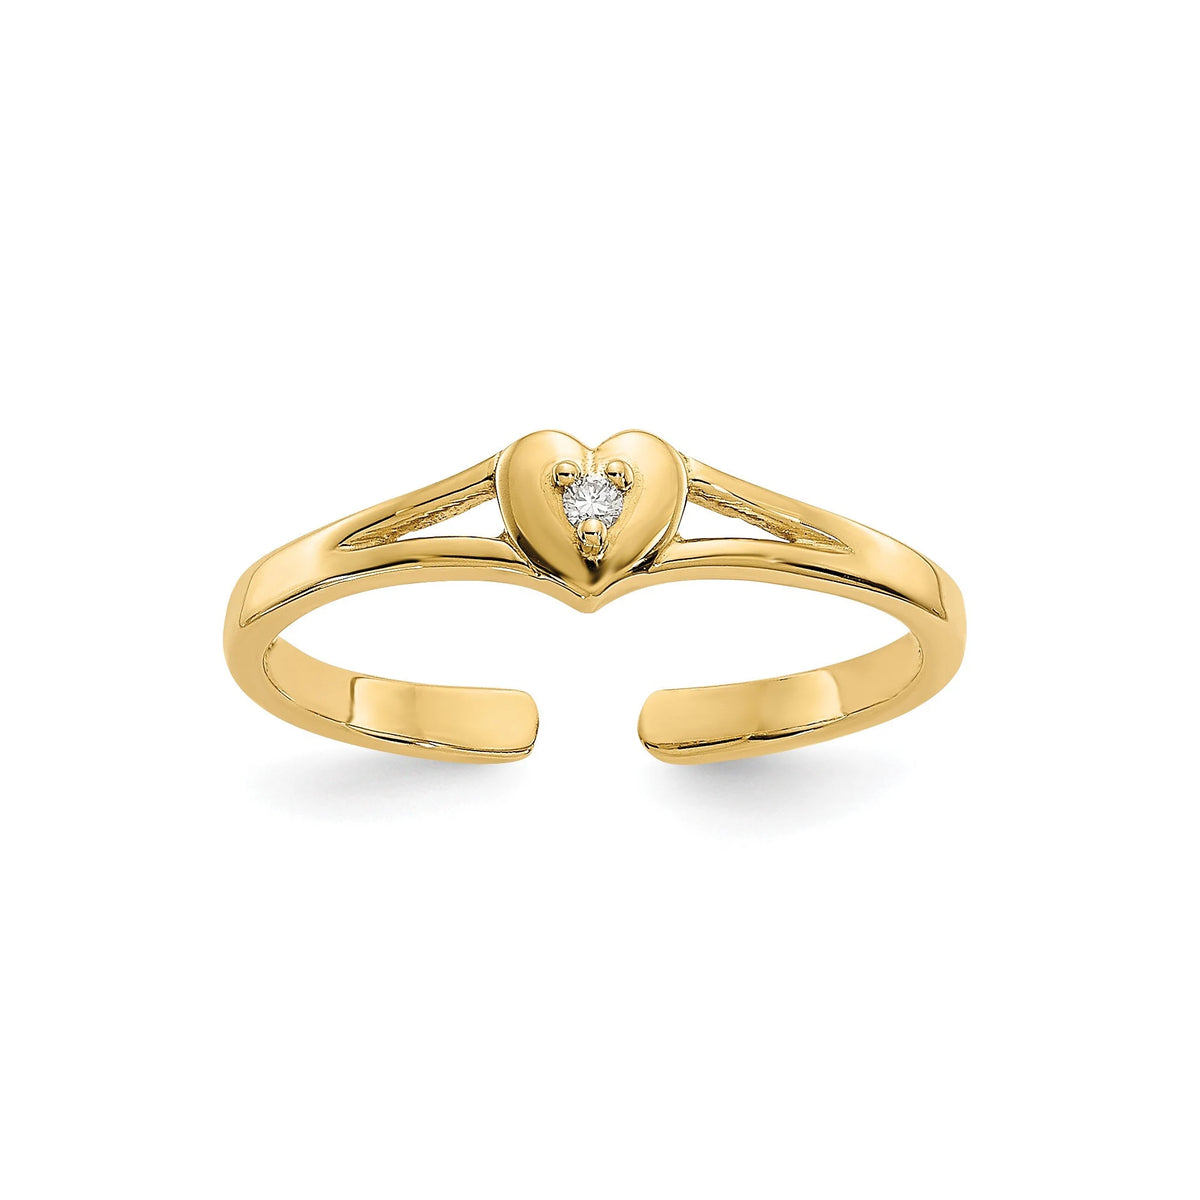 14k Yellow Gold Diamond Adjustable Heart Toe Ring 1mm Thin Band- Gift Box Included